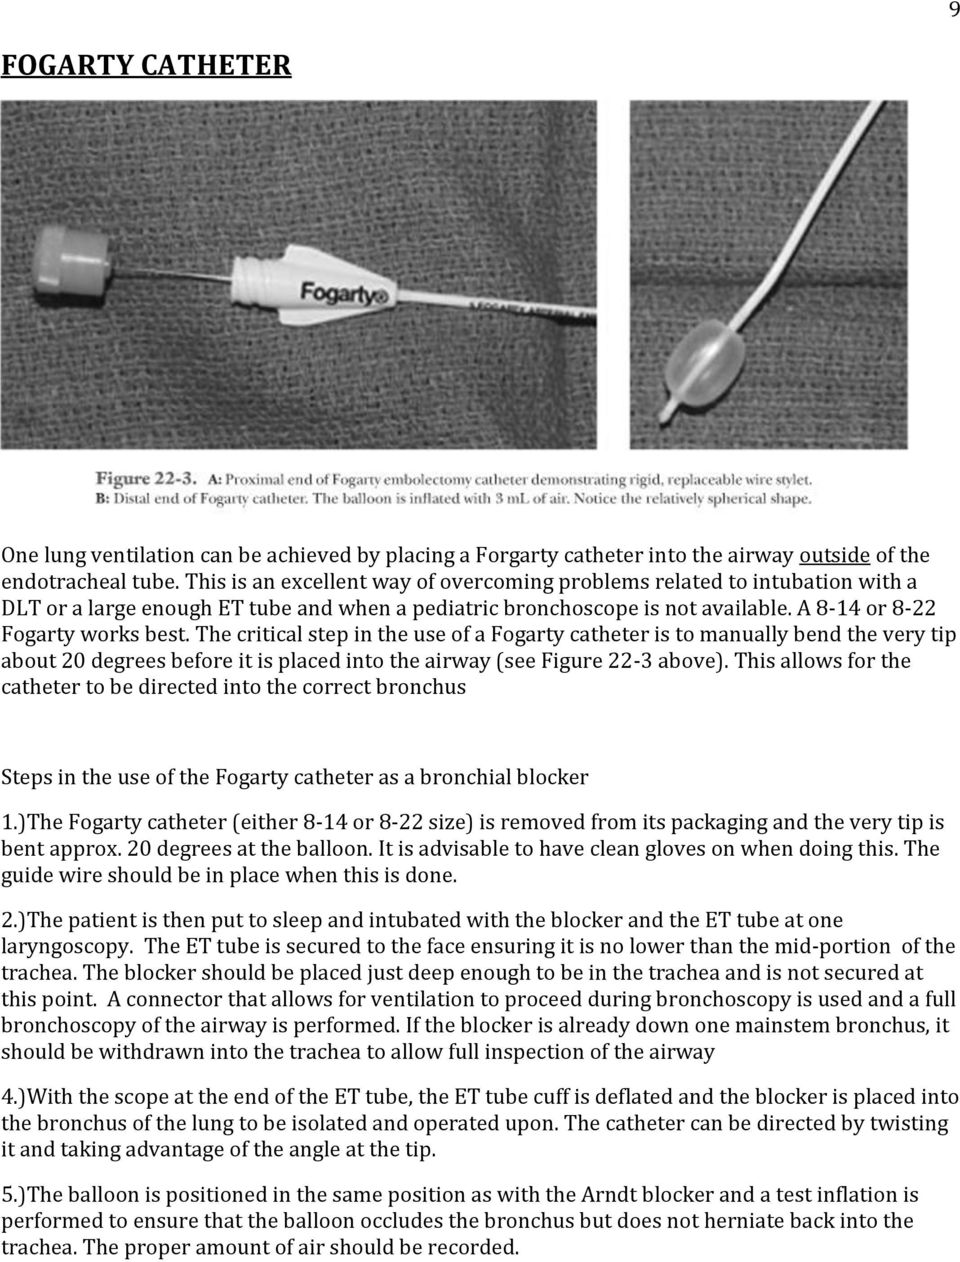 The critical step in the use of a Fogarty catheter is to manually bend the very tip about 20 degrees before it is placed into the airway (see Figure 22-3 above).